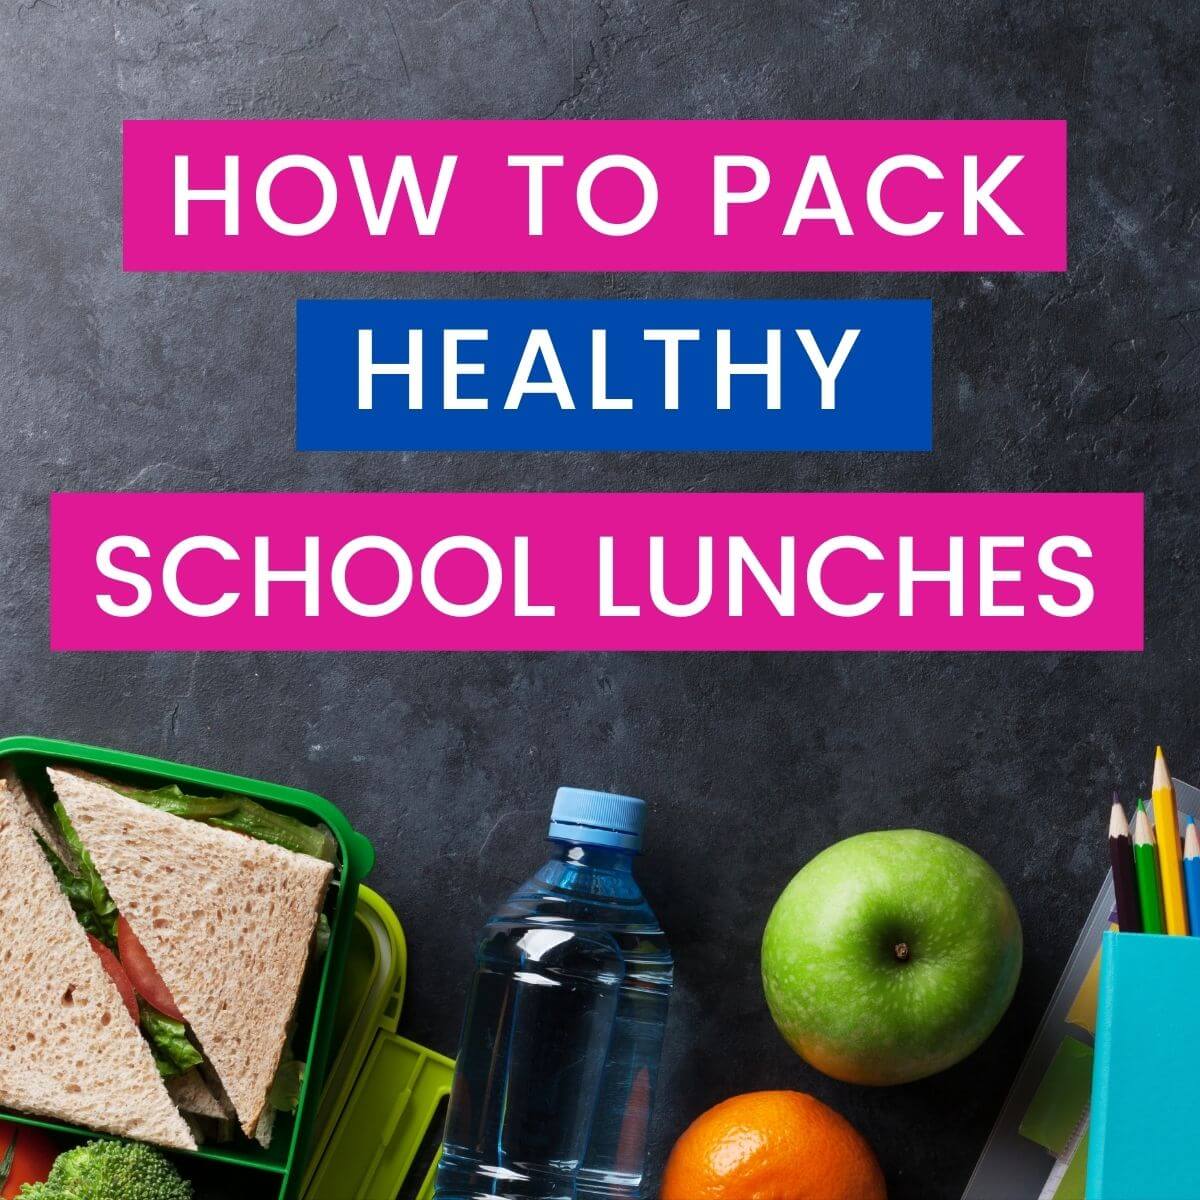 How to pack healthy lunches for school and work (with cheatsheet)